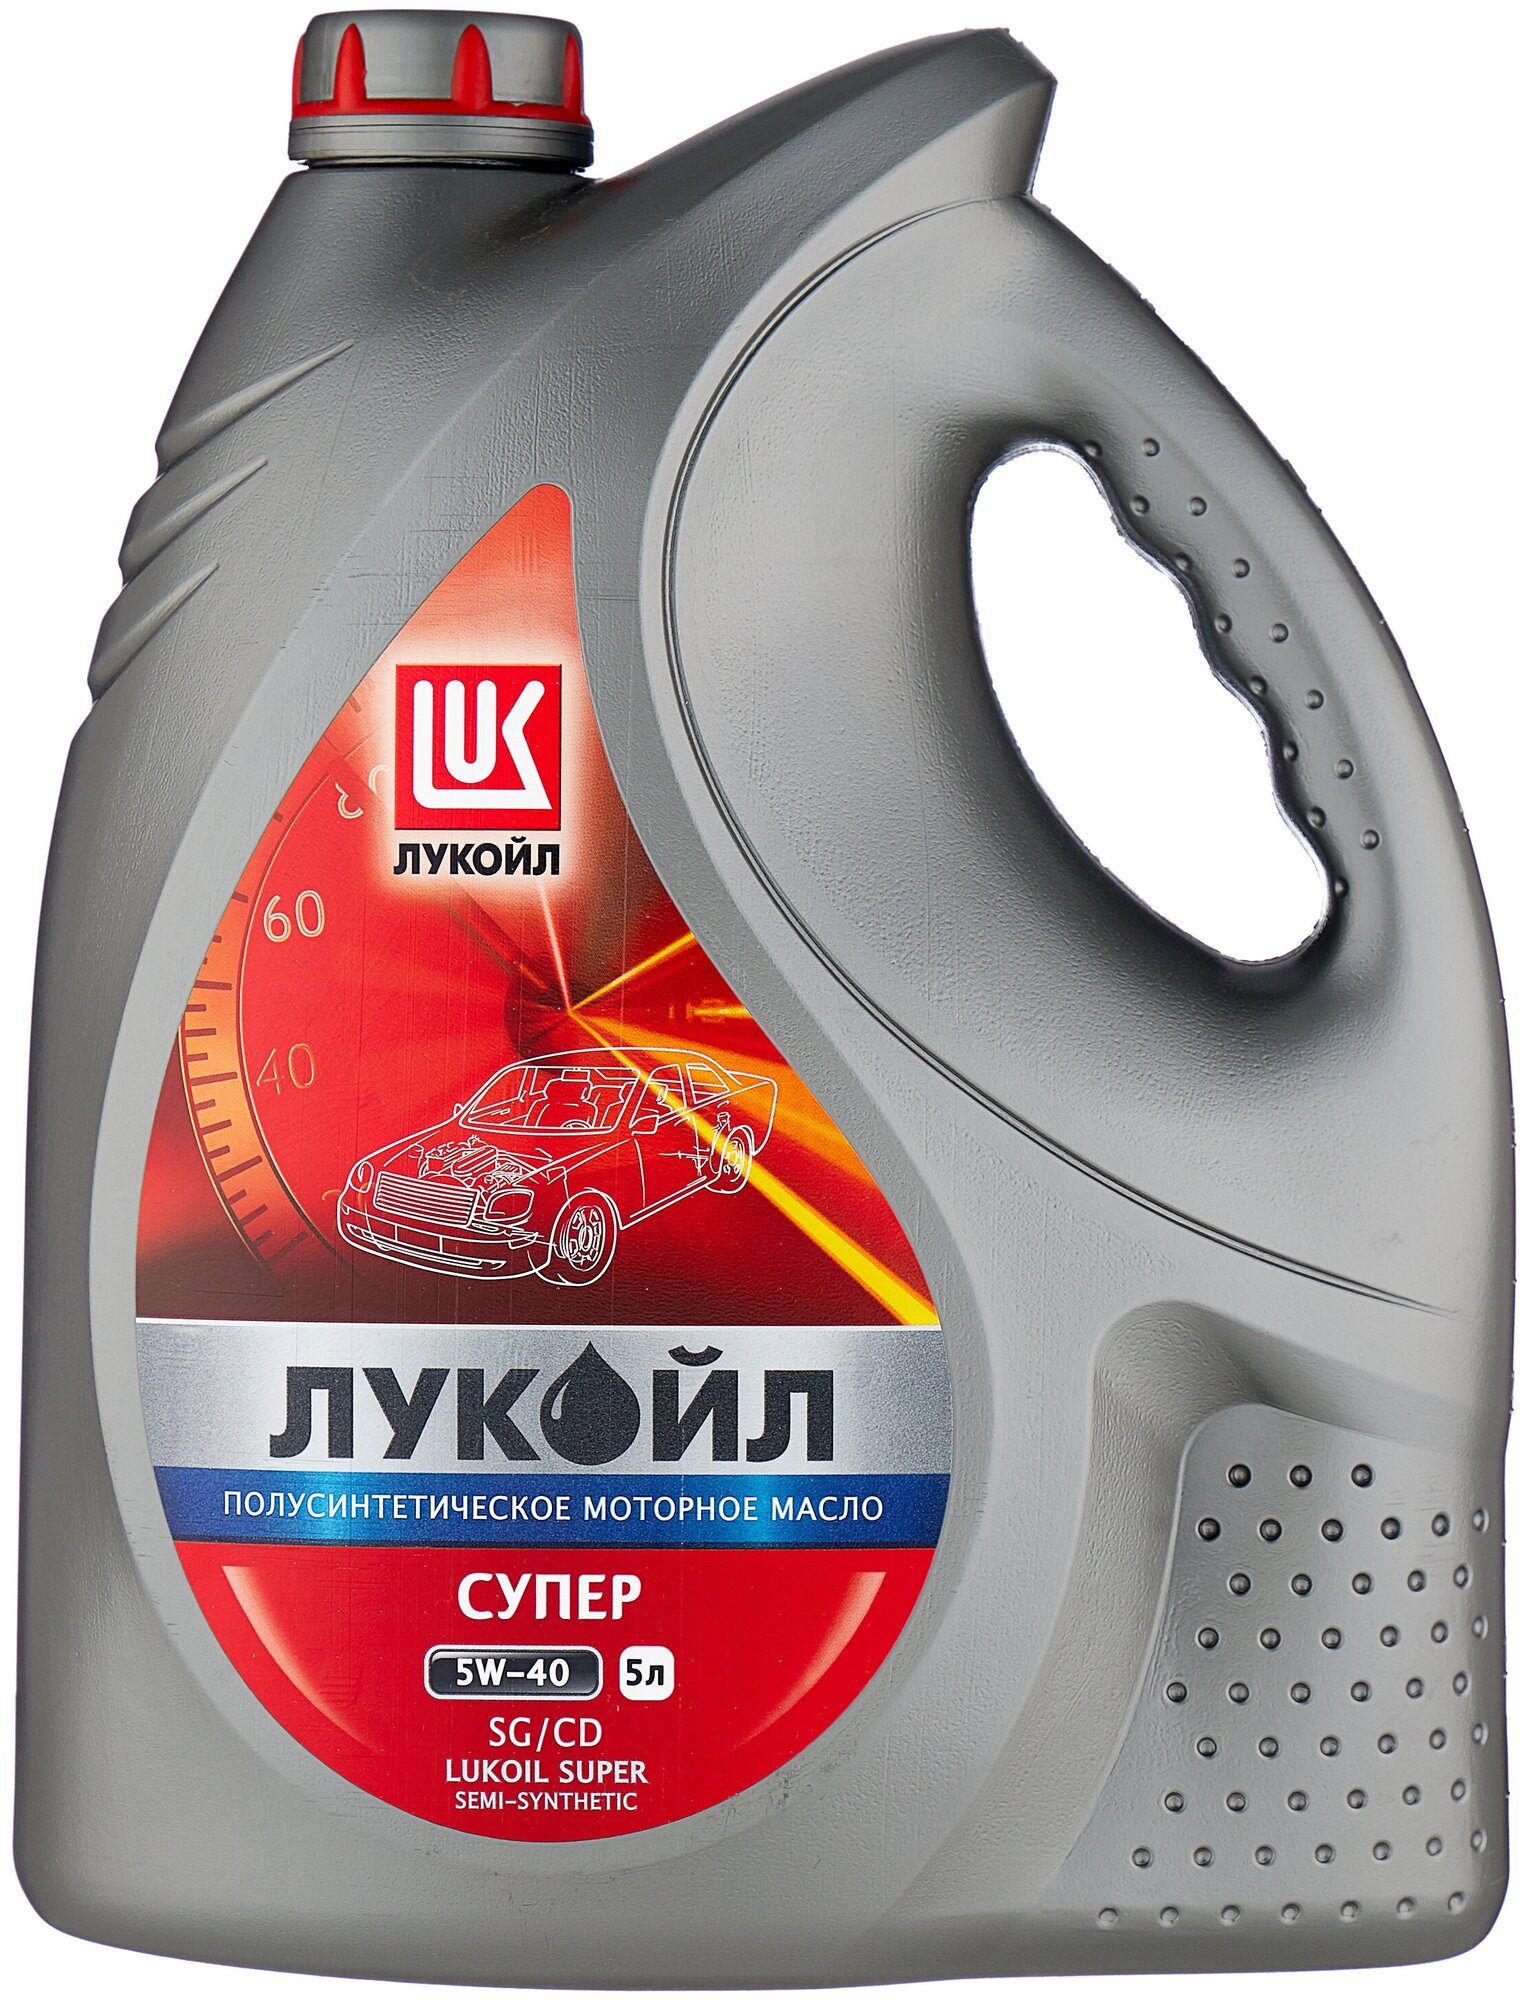 Лукойл 5 40 полусинтетика: Моторное масло Лукойл (Lukoil) LUX 5W-40 .